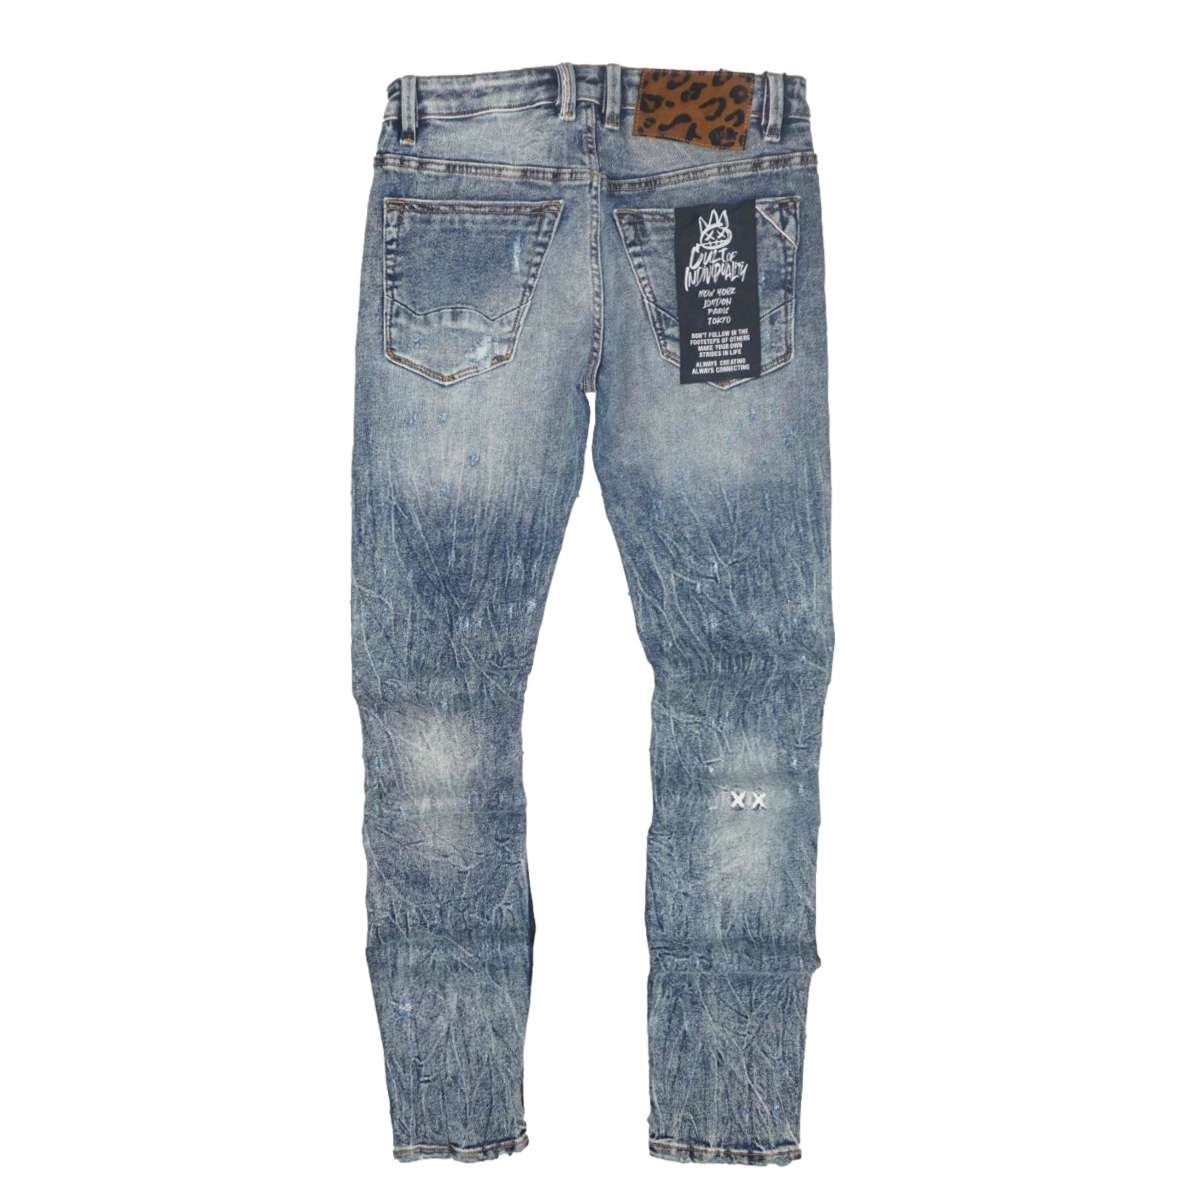 Ripped  Skinny Jeans (Blue) /C1